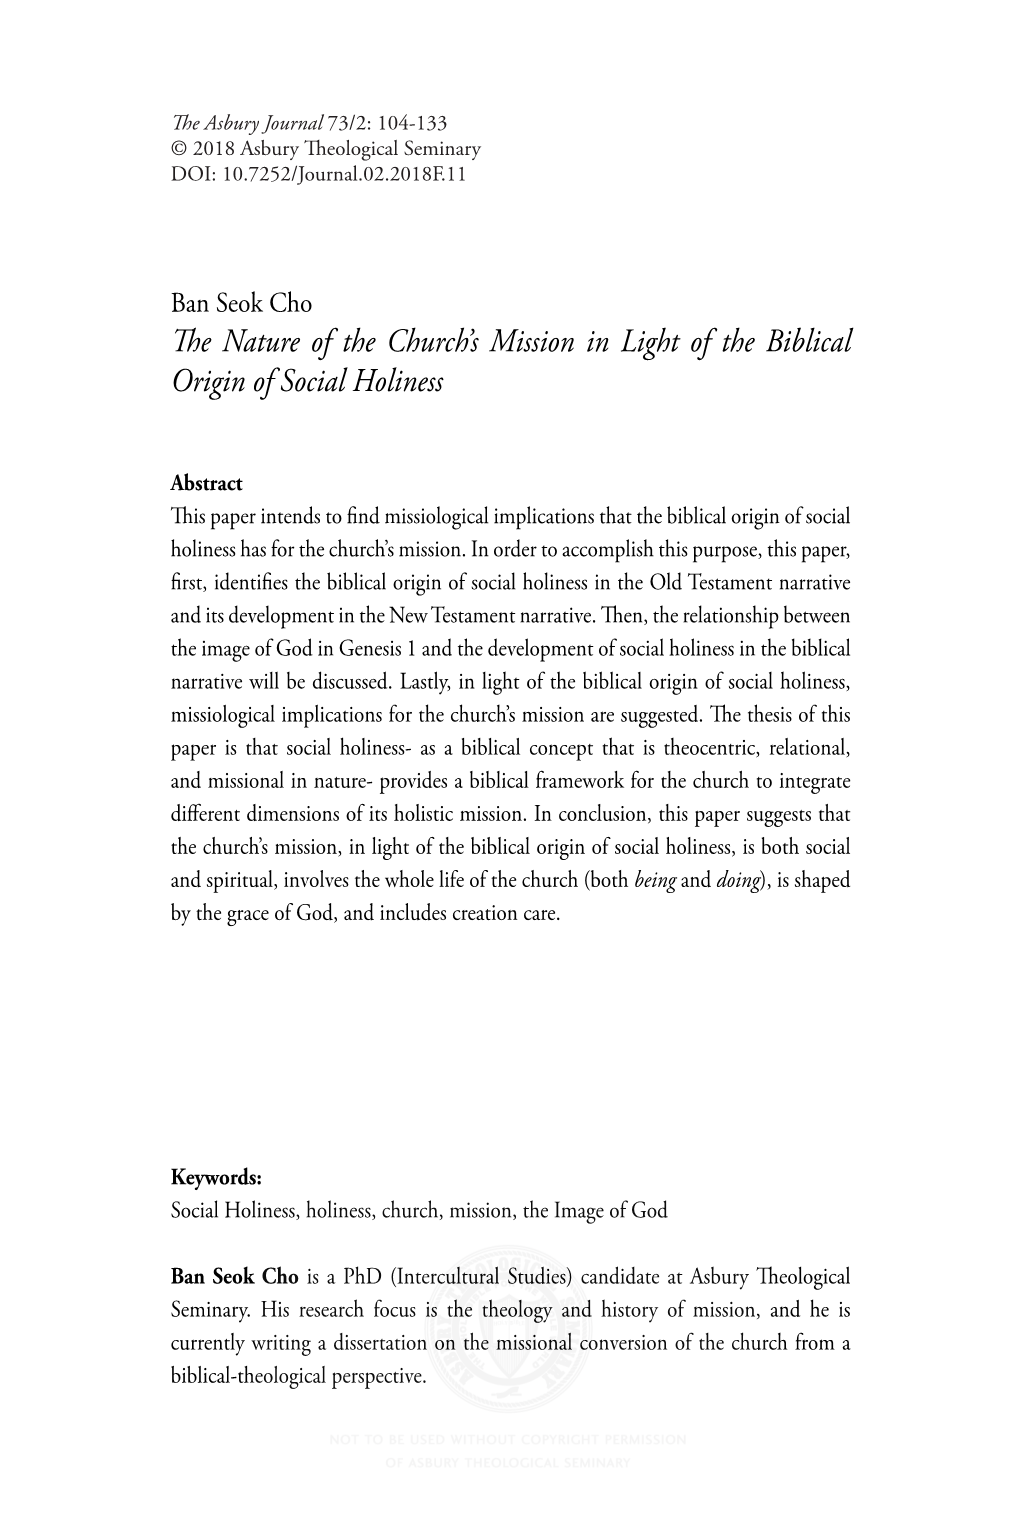 The Nature of the Church's Mission in Light of the Biblical Origin of Social